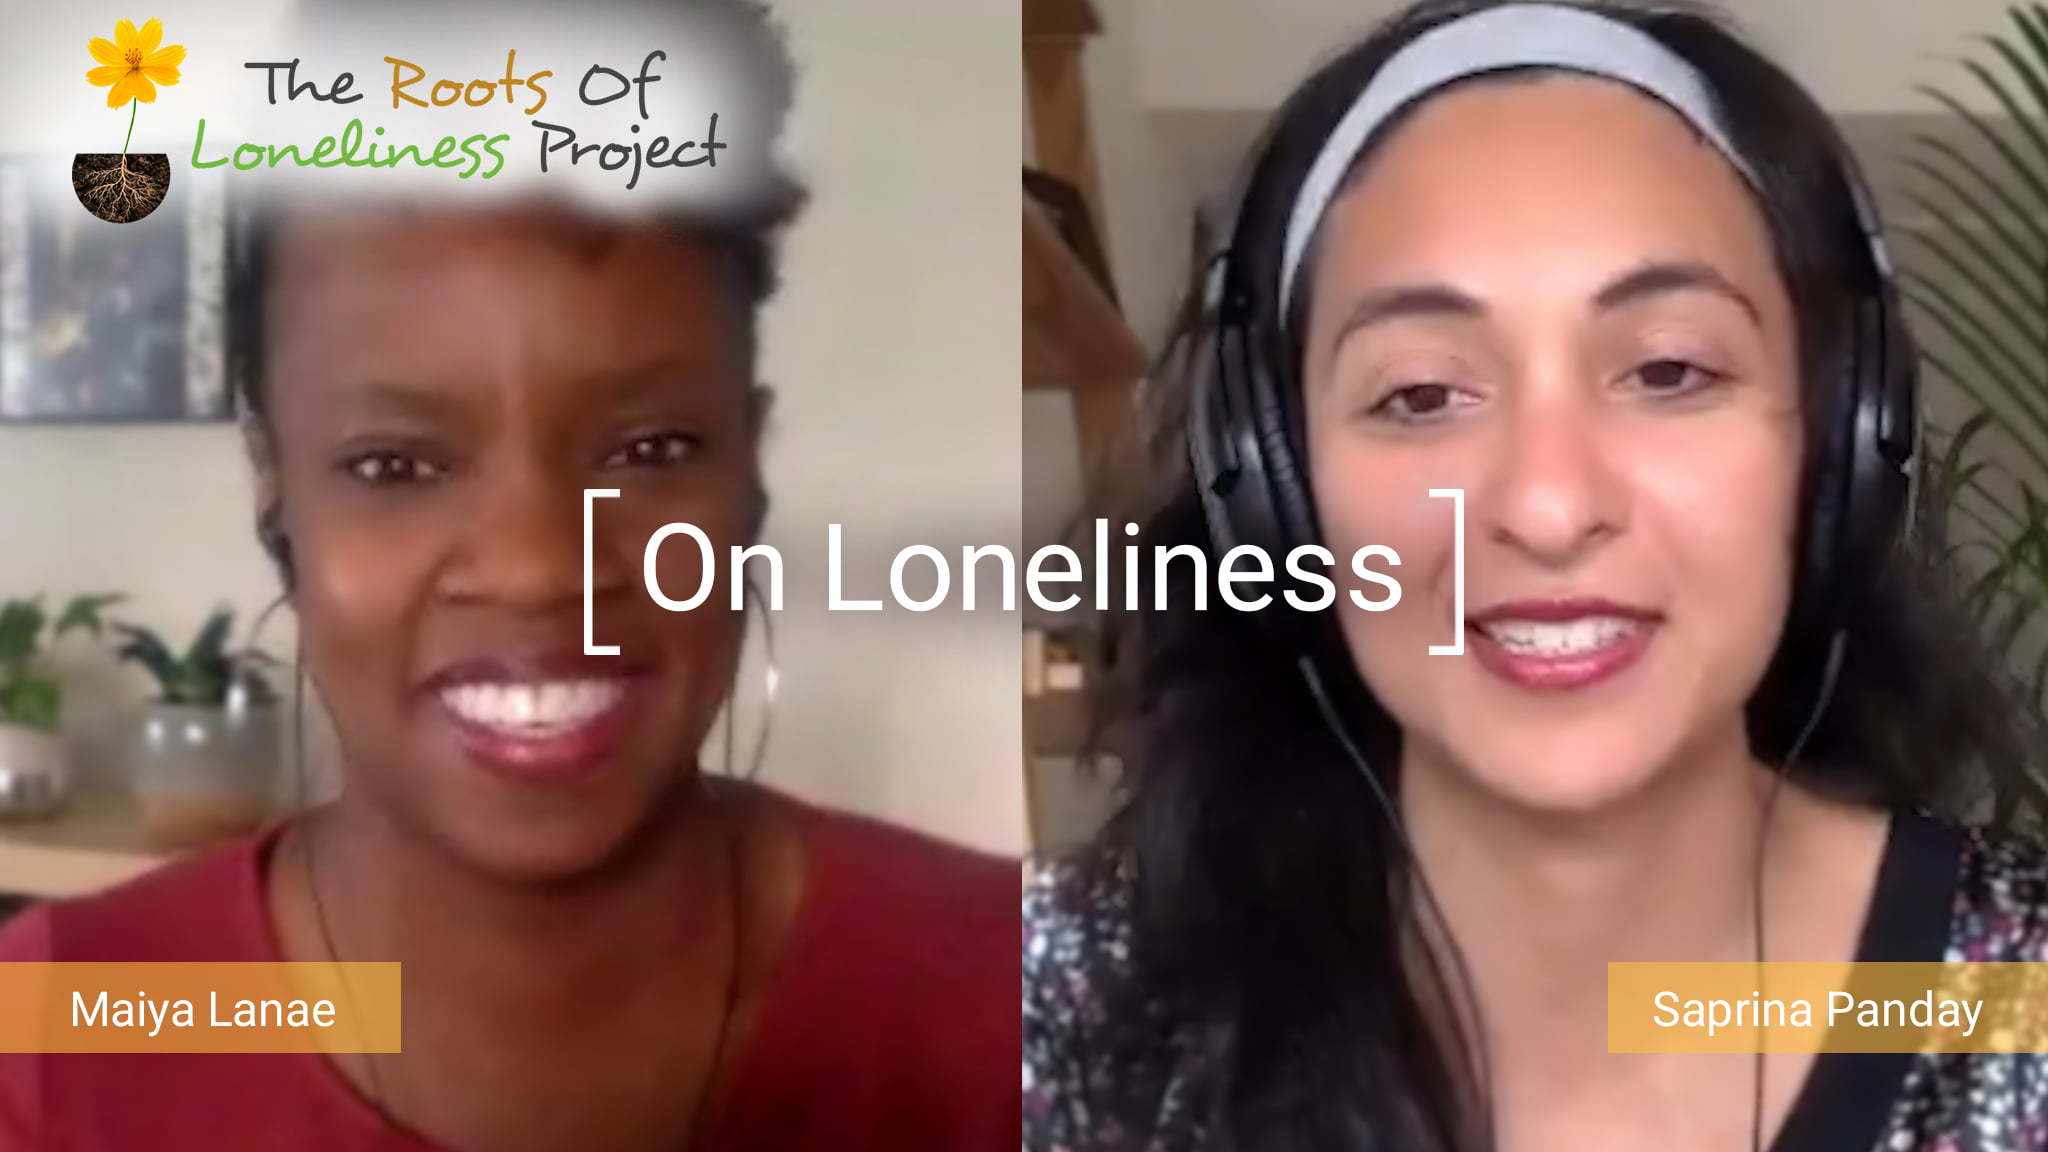 Screenshot Of A Video Interview With Maiya Lanae And Saprina Panday For Women's Health Interactive Discussing The Topic Of Loneliness